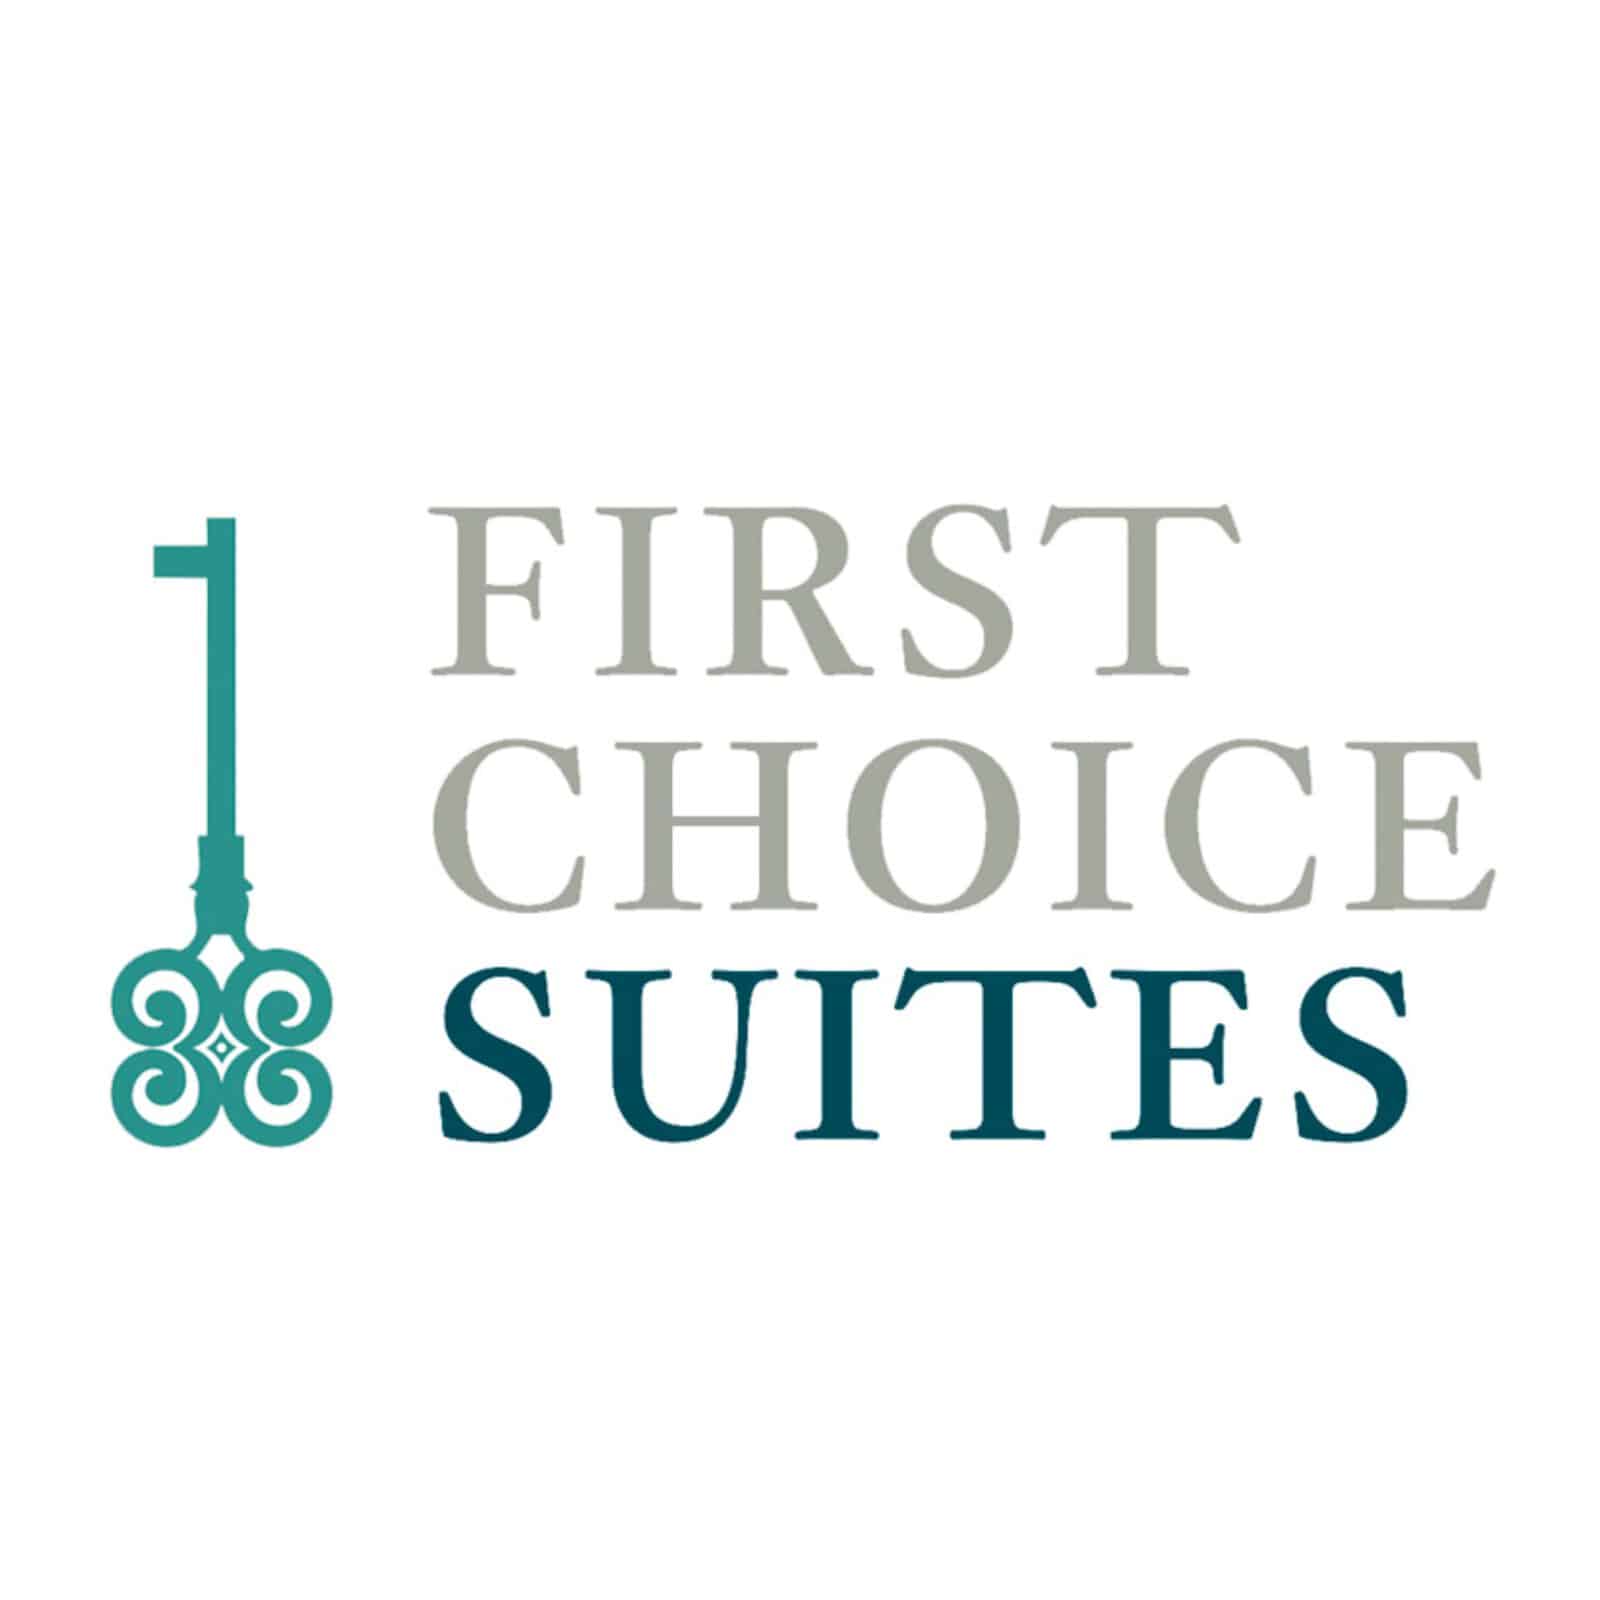 First Choice Suites